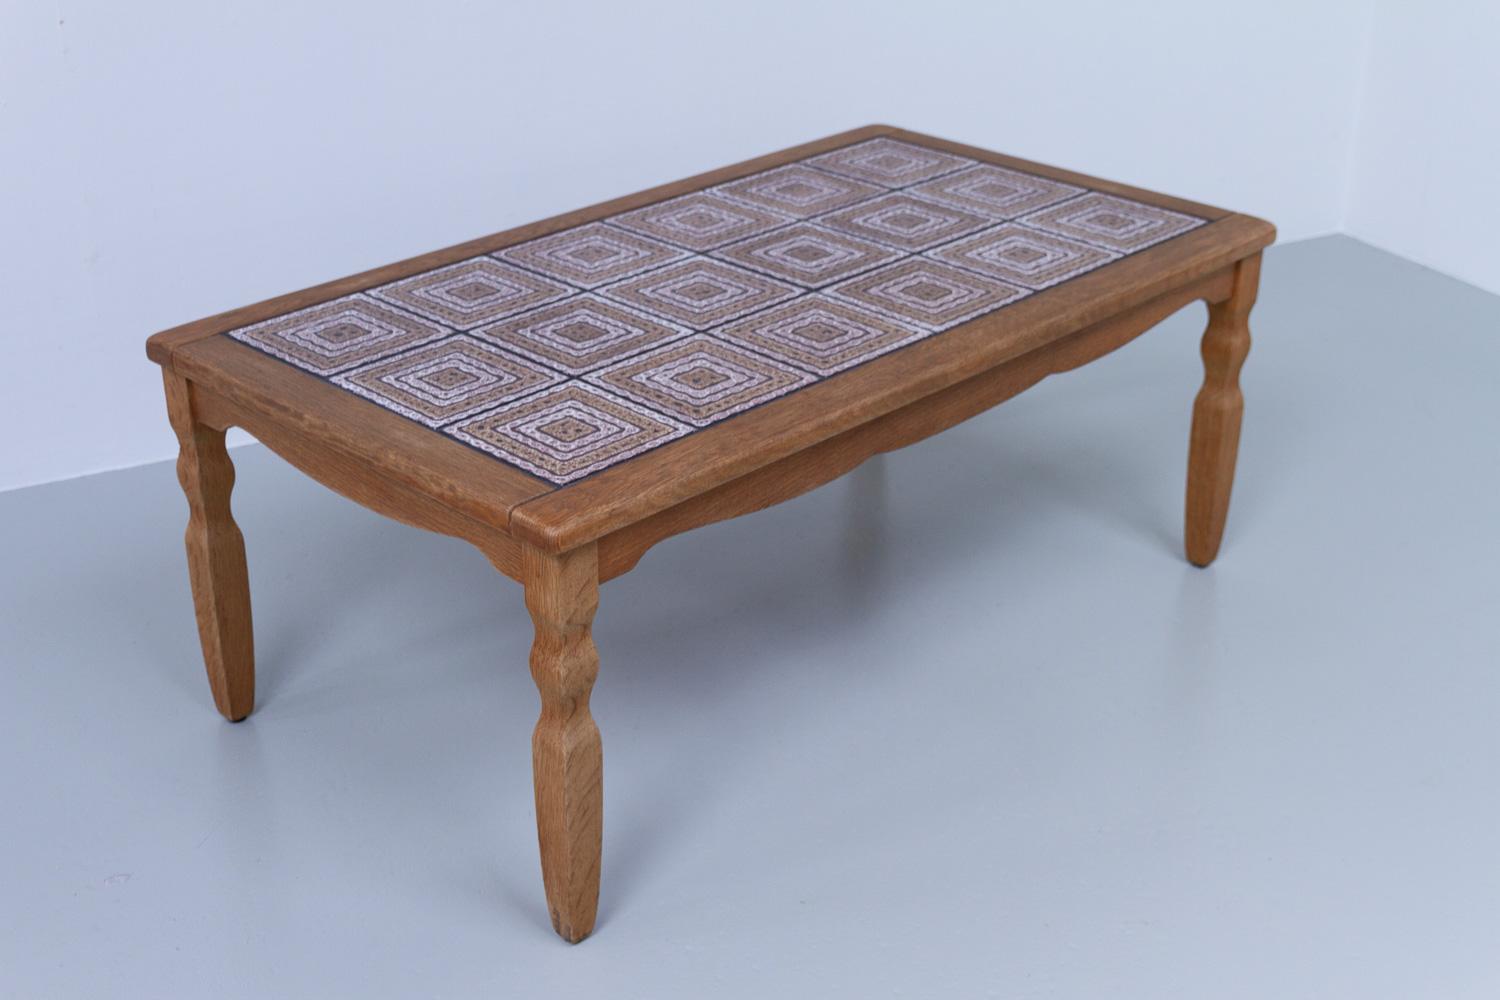 Vintage Danish Brutalist Coffee Table in Oak with Tiles, 1960s.
Danish Modern brutalist style coffee table in solid nordic oak. Inlaid with ceramic patterned tiles. 
Good vintage condition. All tiles are intact. Minor wear to the wood, please see